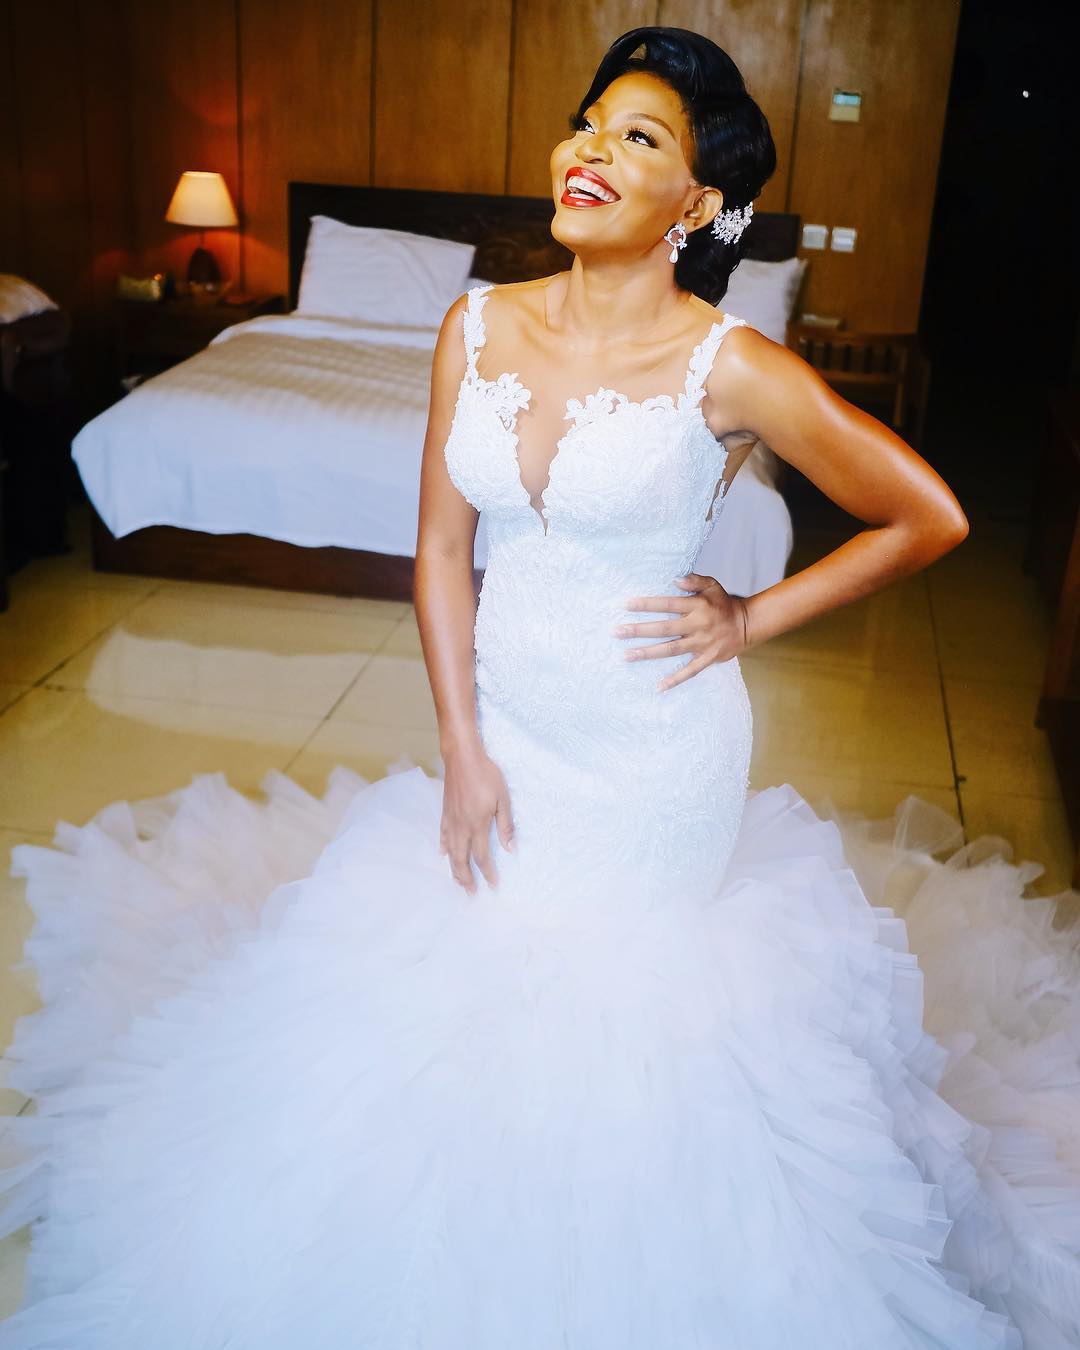 Eden was Whole Vibe in this Gorgeous Dress for her Wedding